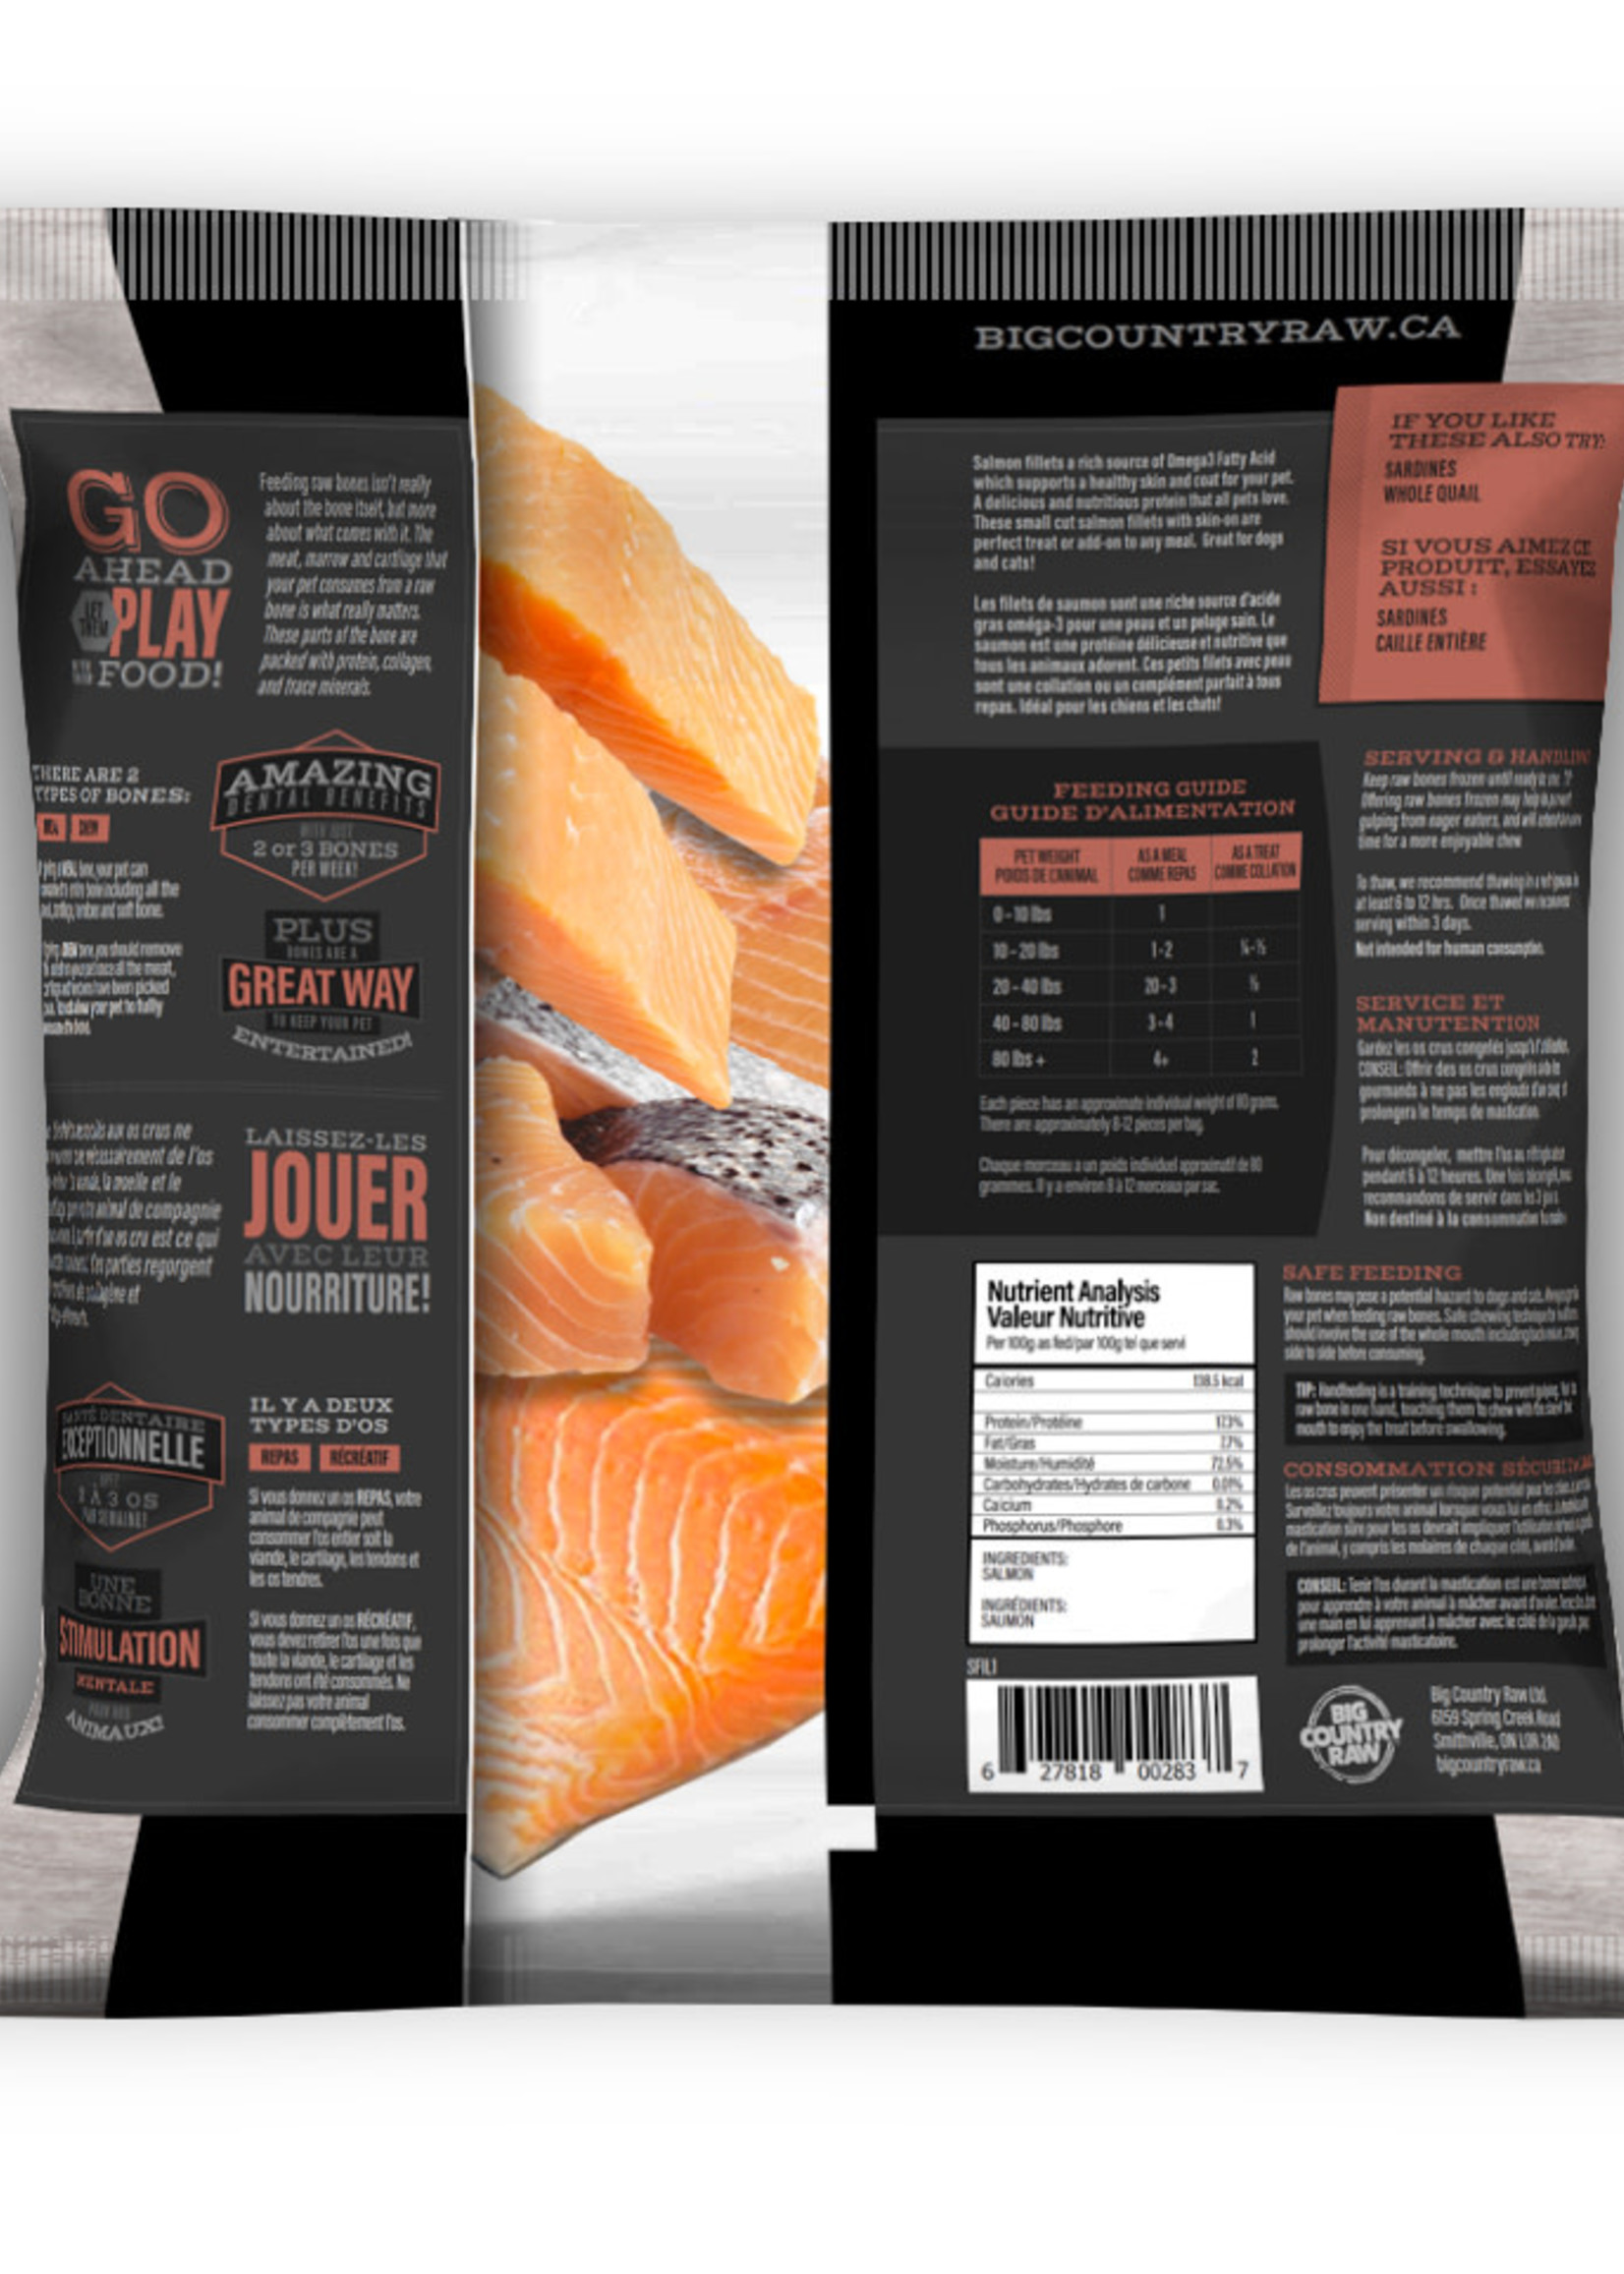 Big Country Raw Big Country Raw Salmon Fillets 1lb